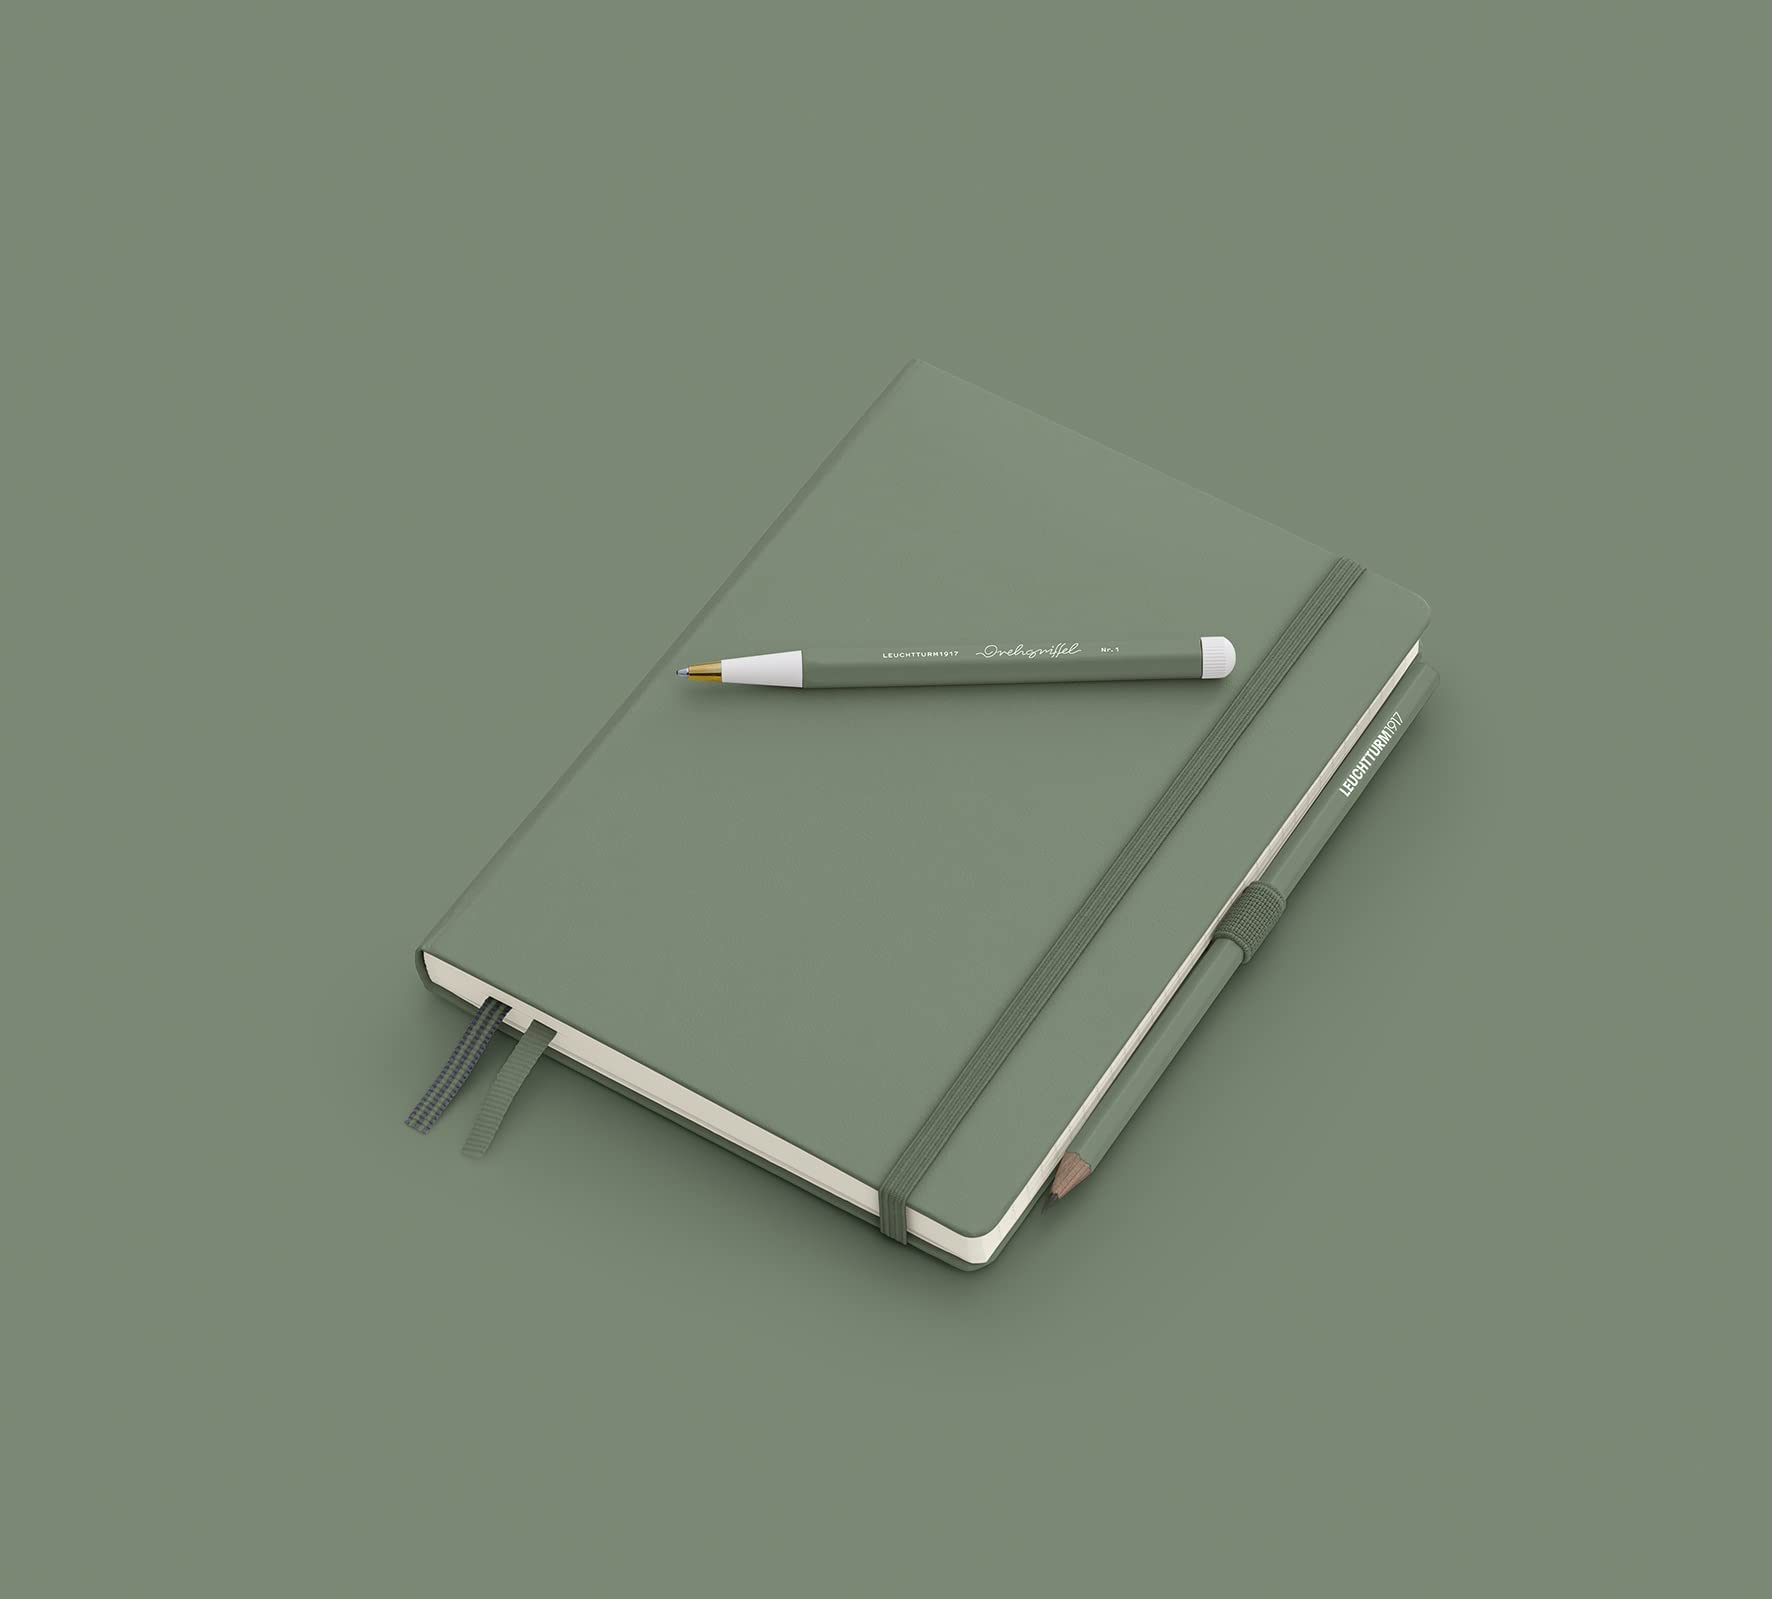 LEUCHTTURM1917 365490 Notebook Medium (A5), Hardcover, 251 Numbered Pages, Olive, Ruled